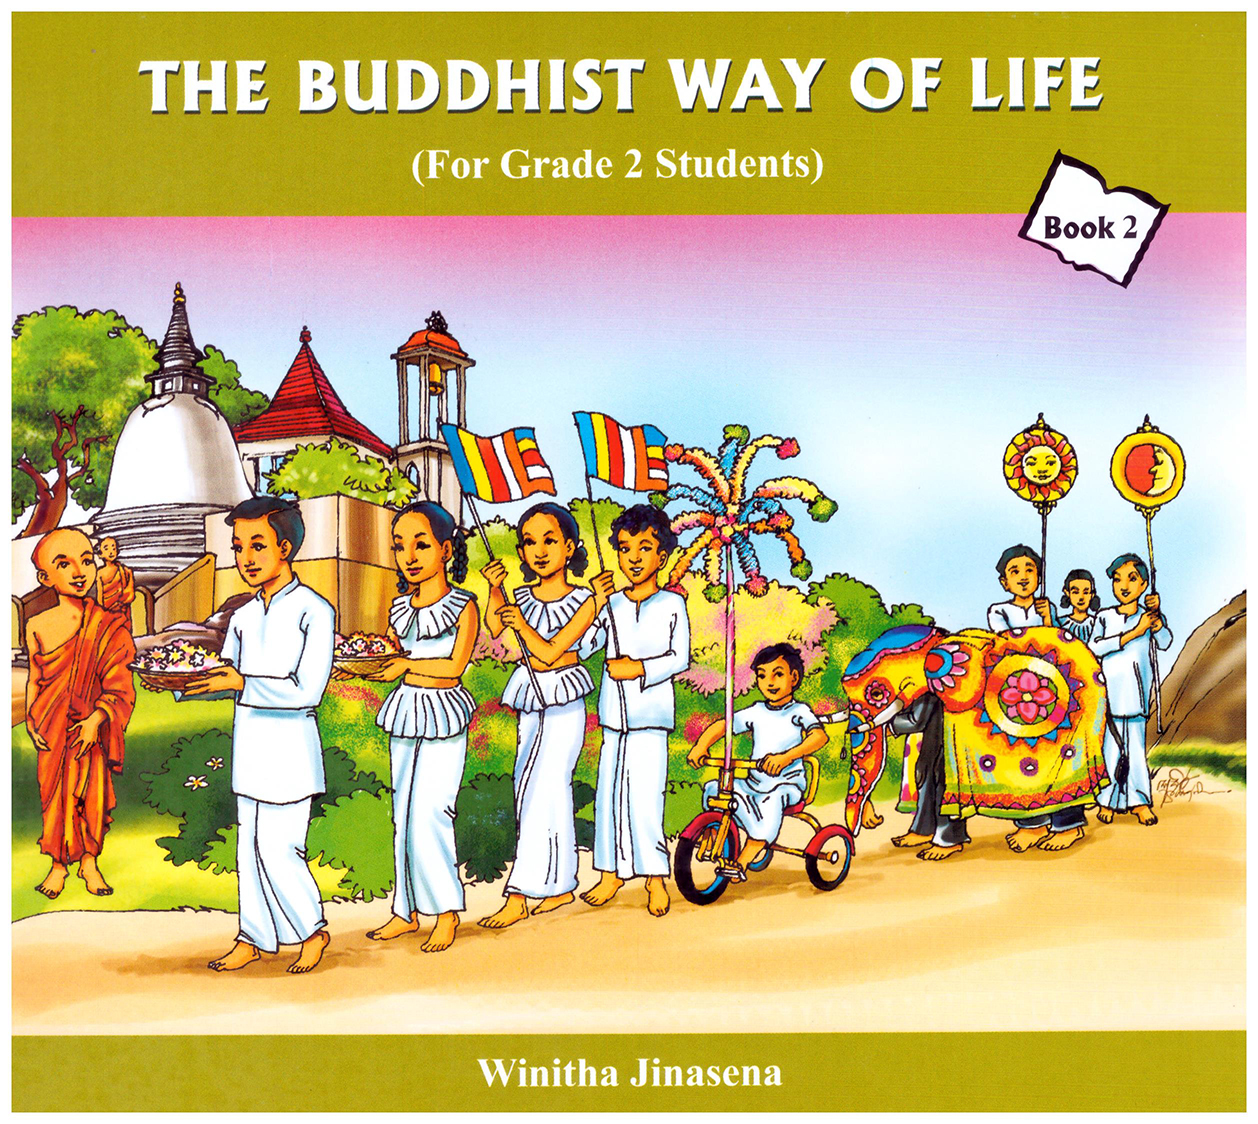 The Buddhist Way of Life Book 2